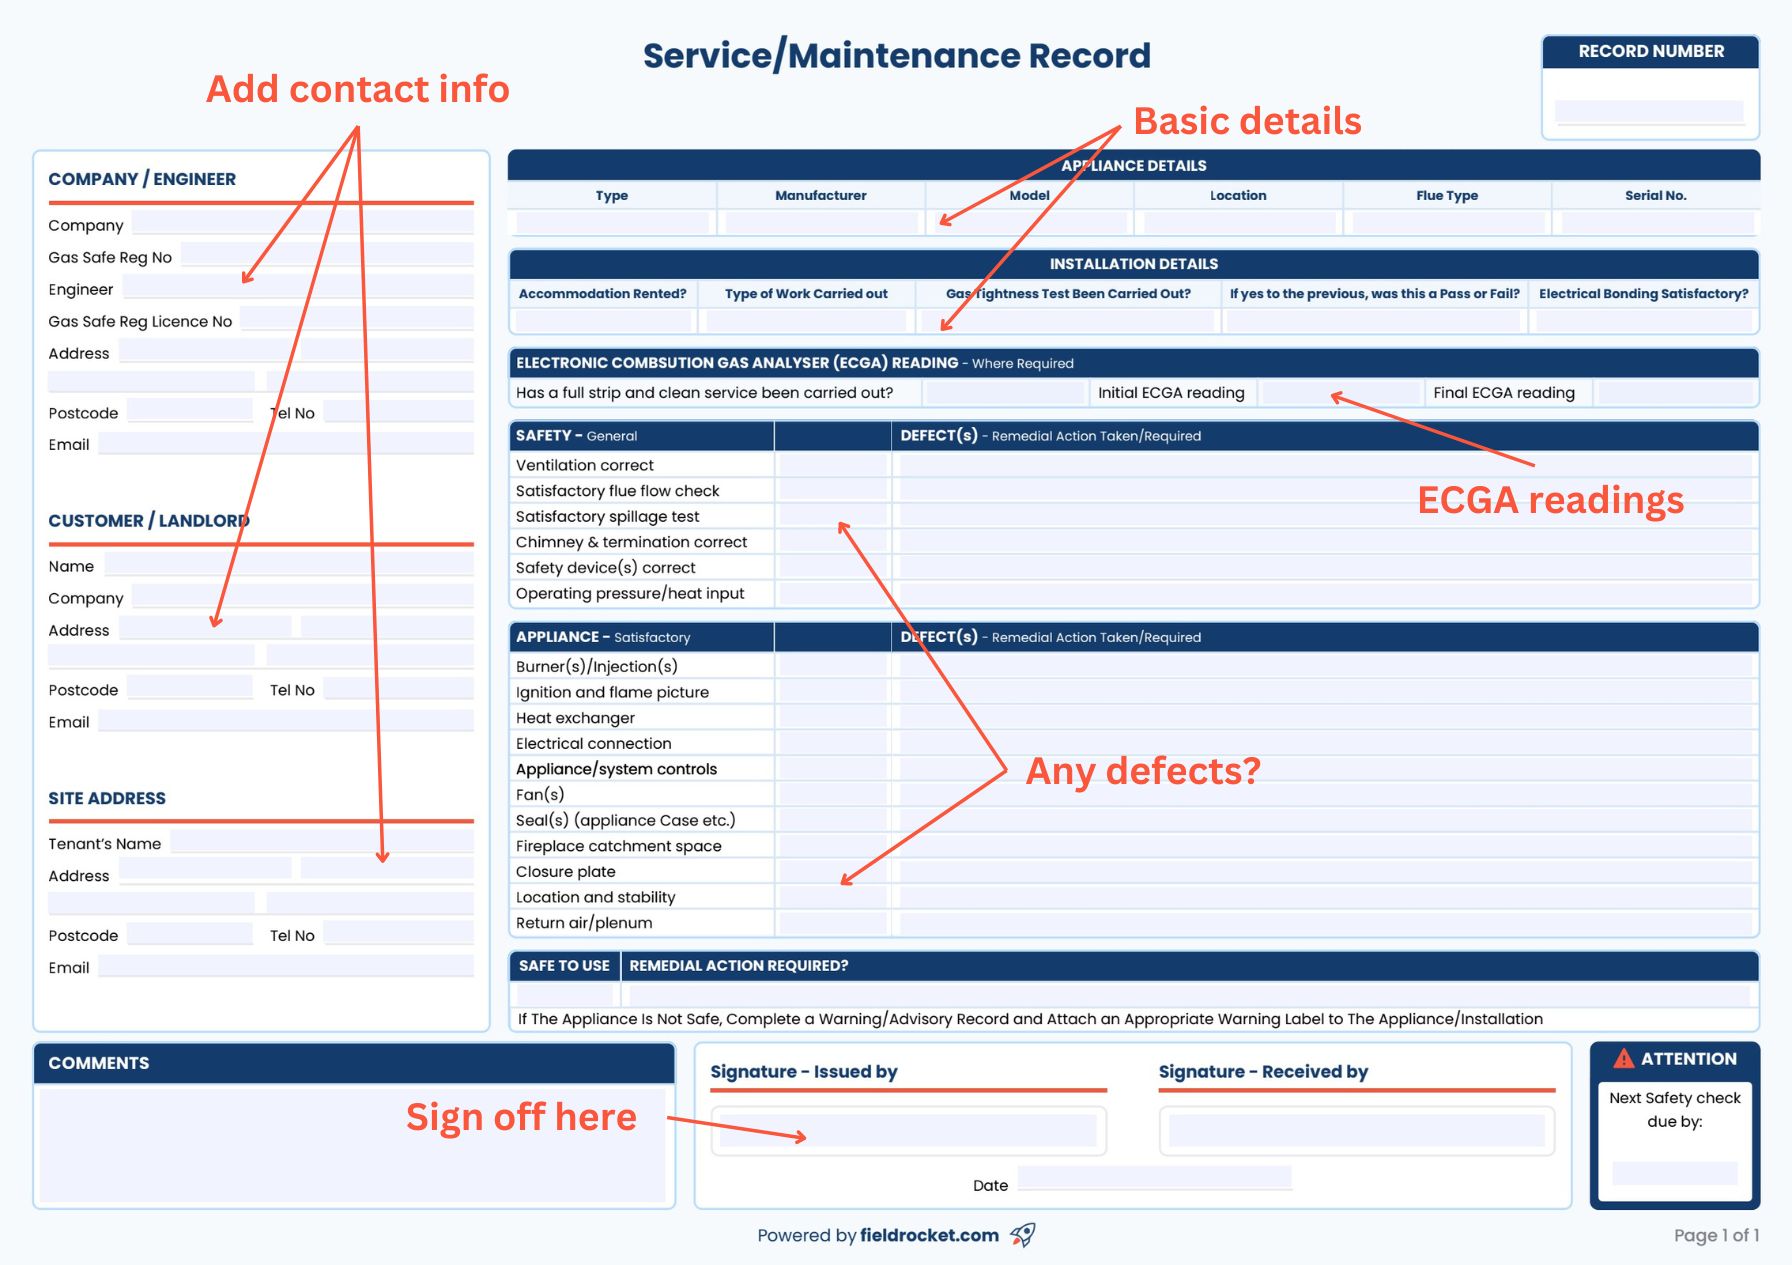 How to use our PDF CP6 gas service/maintenance record template